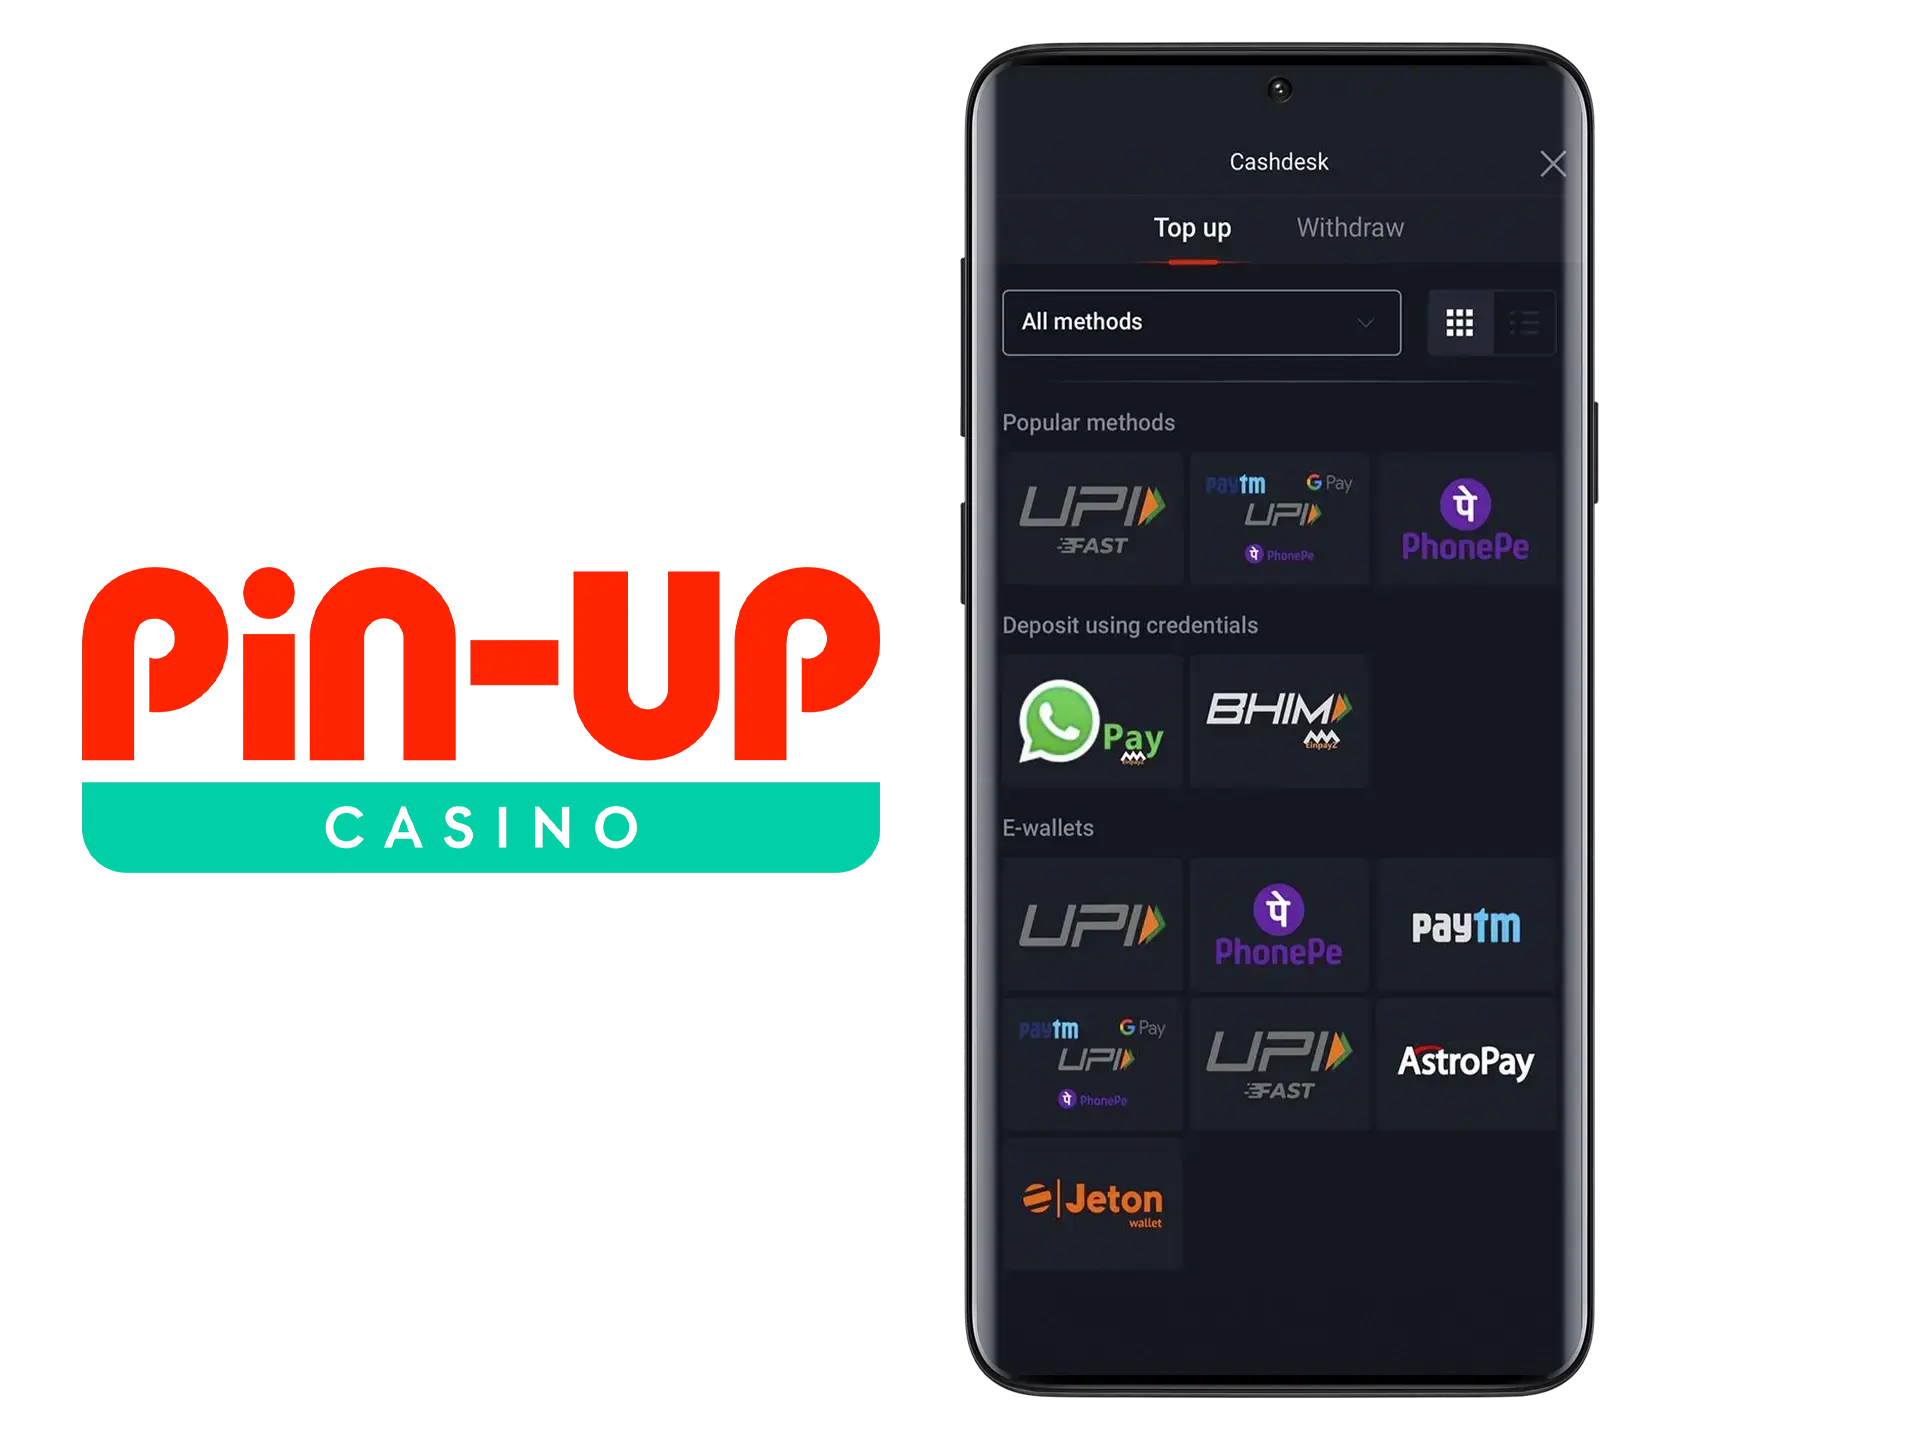 Top up your account and start playing in Pin Up.